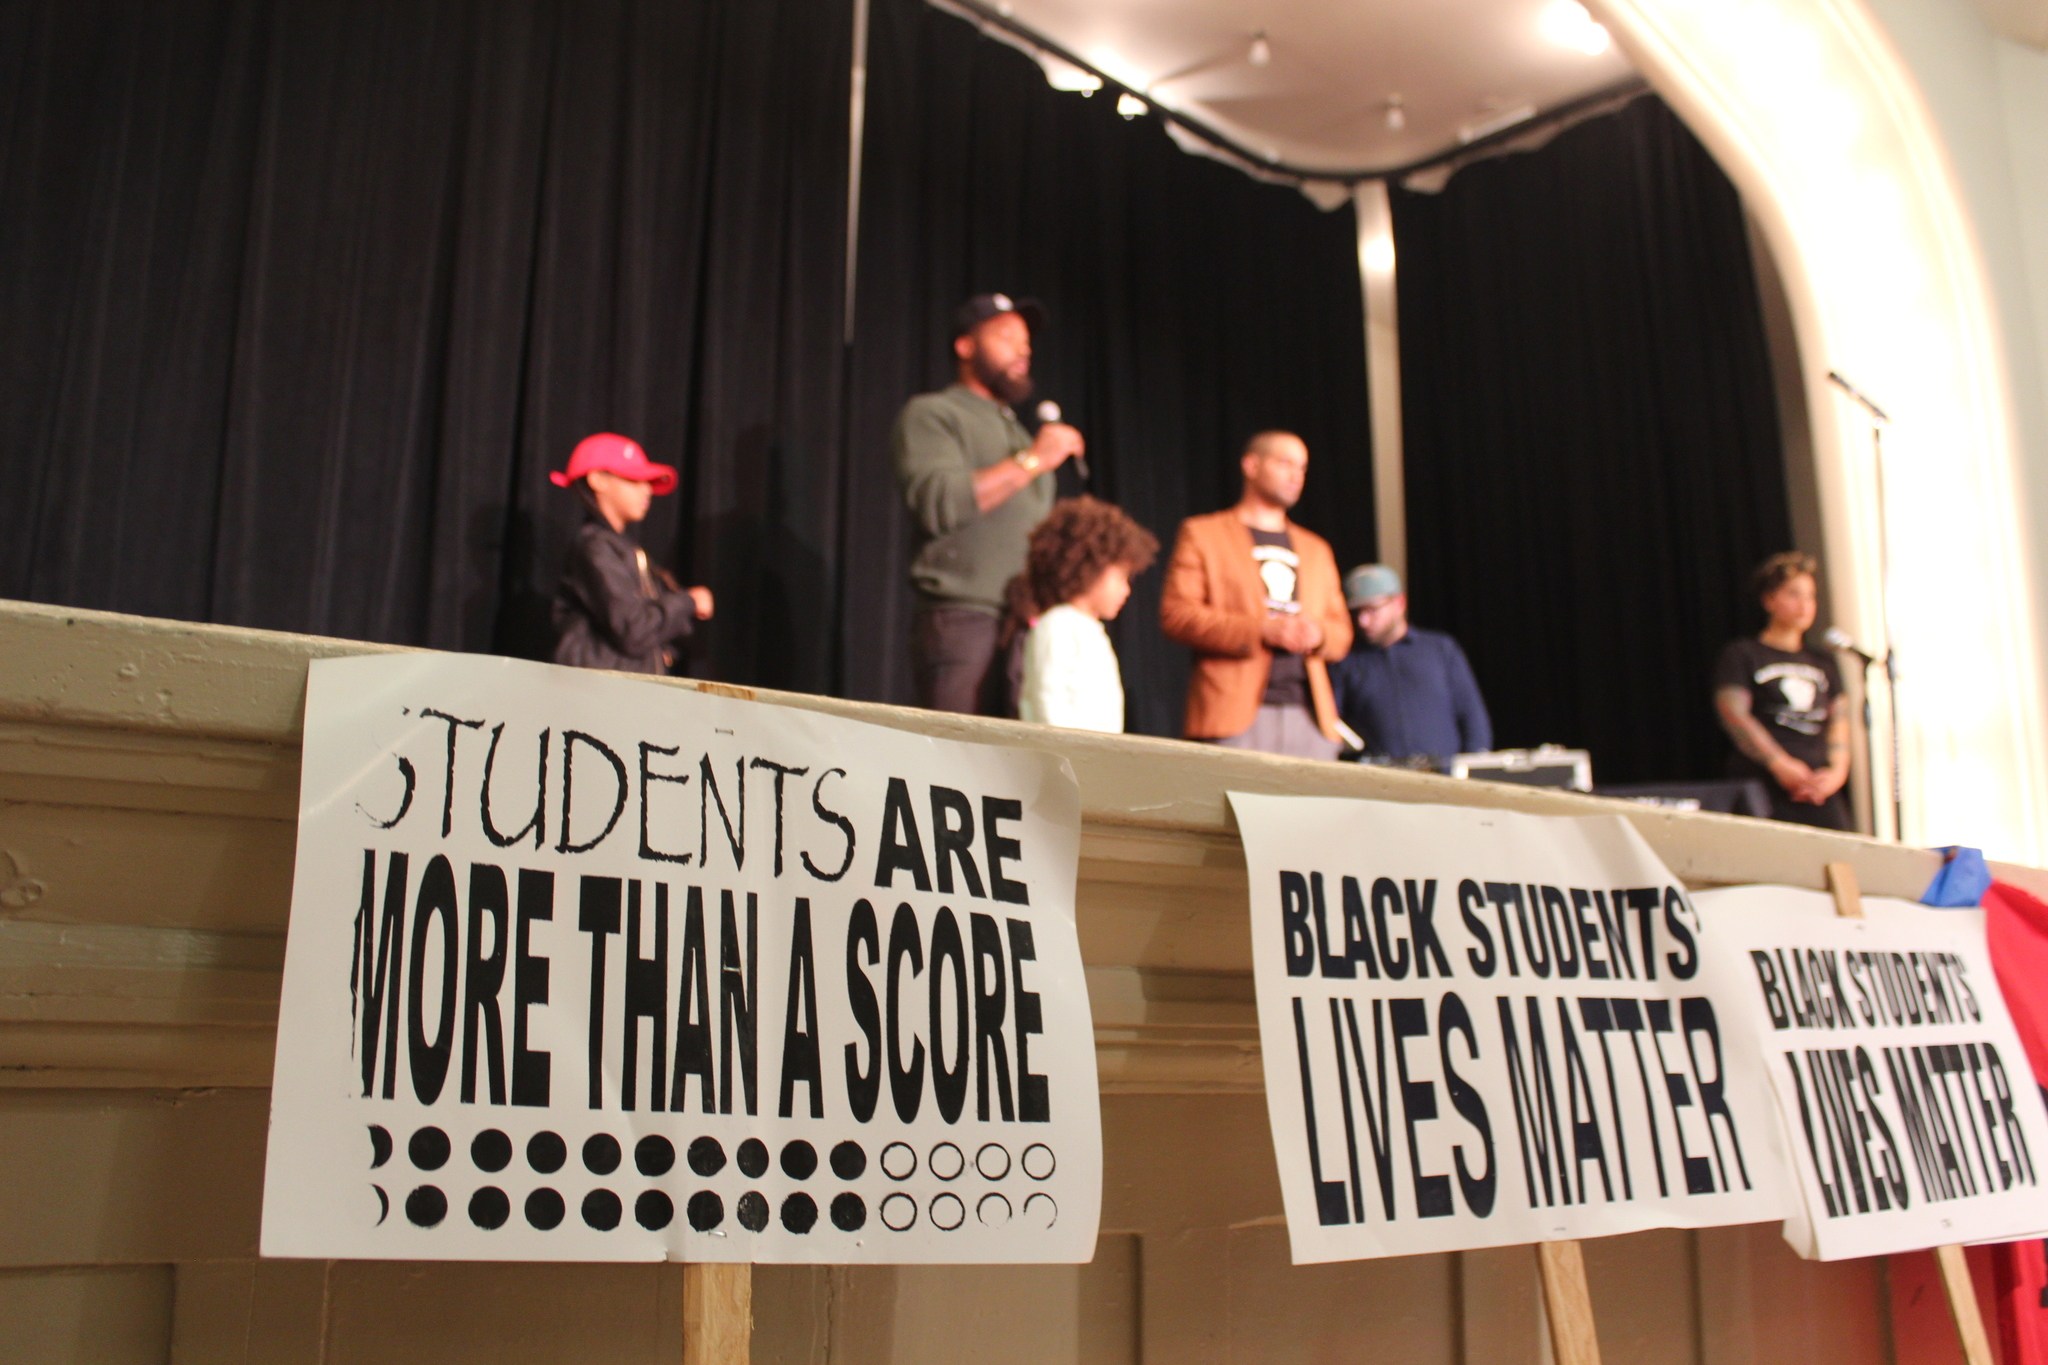 Poets, Dancers and Michael Bennett Rally Black Students in the CD